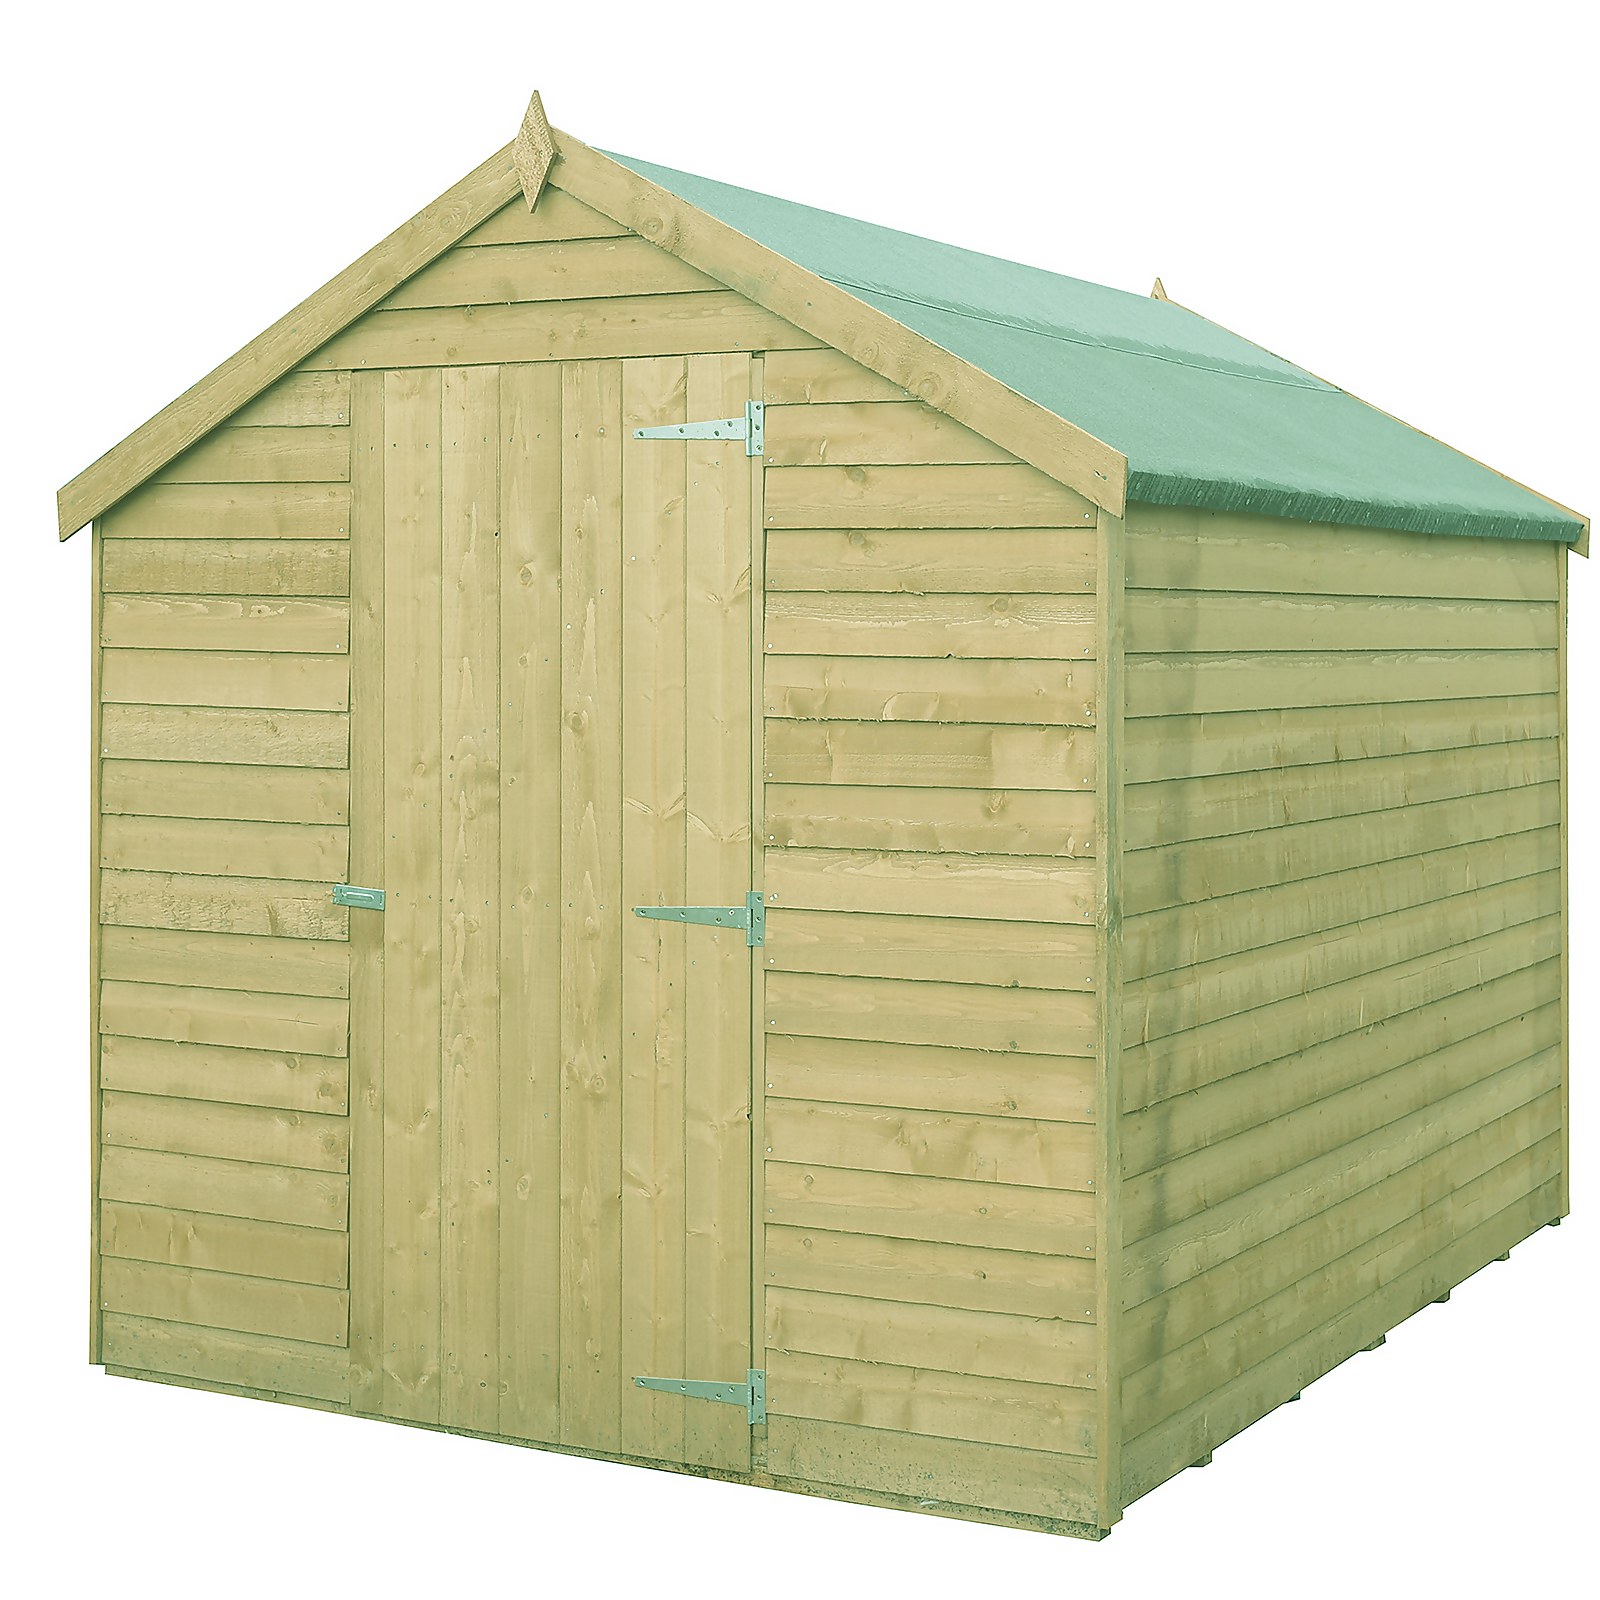 Shire 7x5ft Pressure Treated Garden Shed